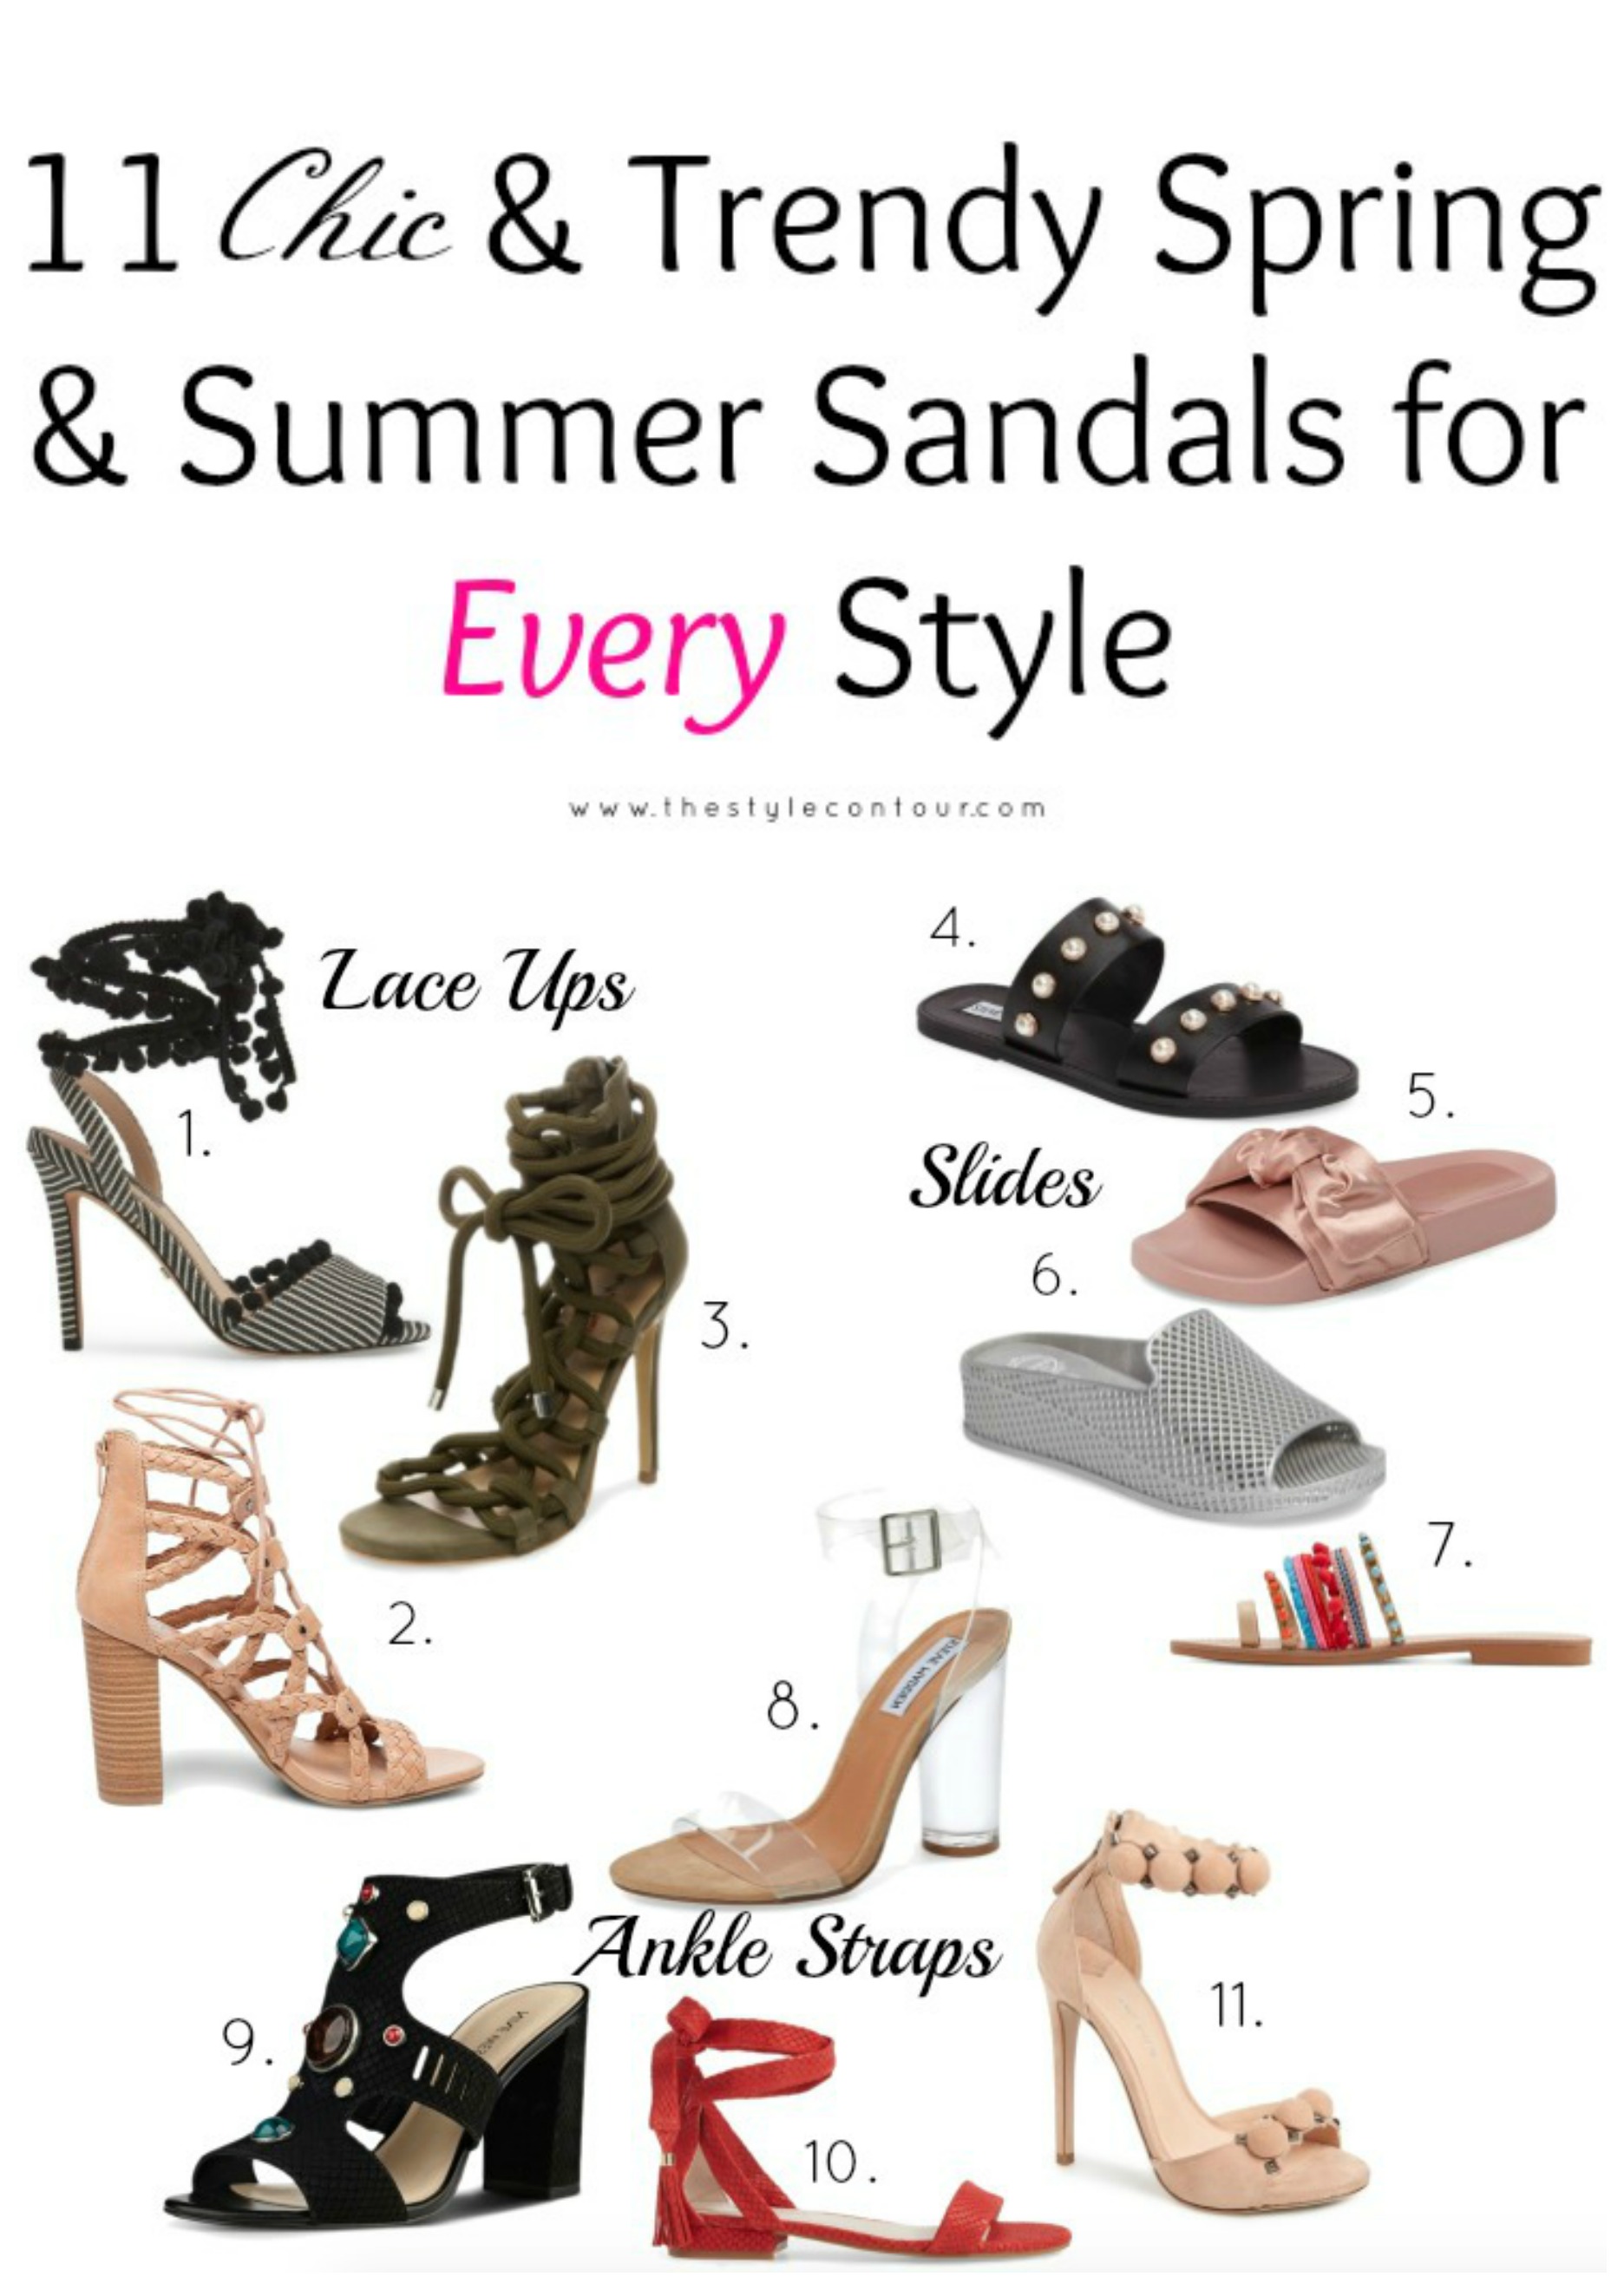 My Top 11 Spring & Summer Sandal Picks 2017 - The Style Contour